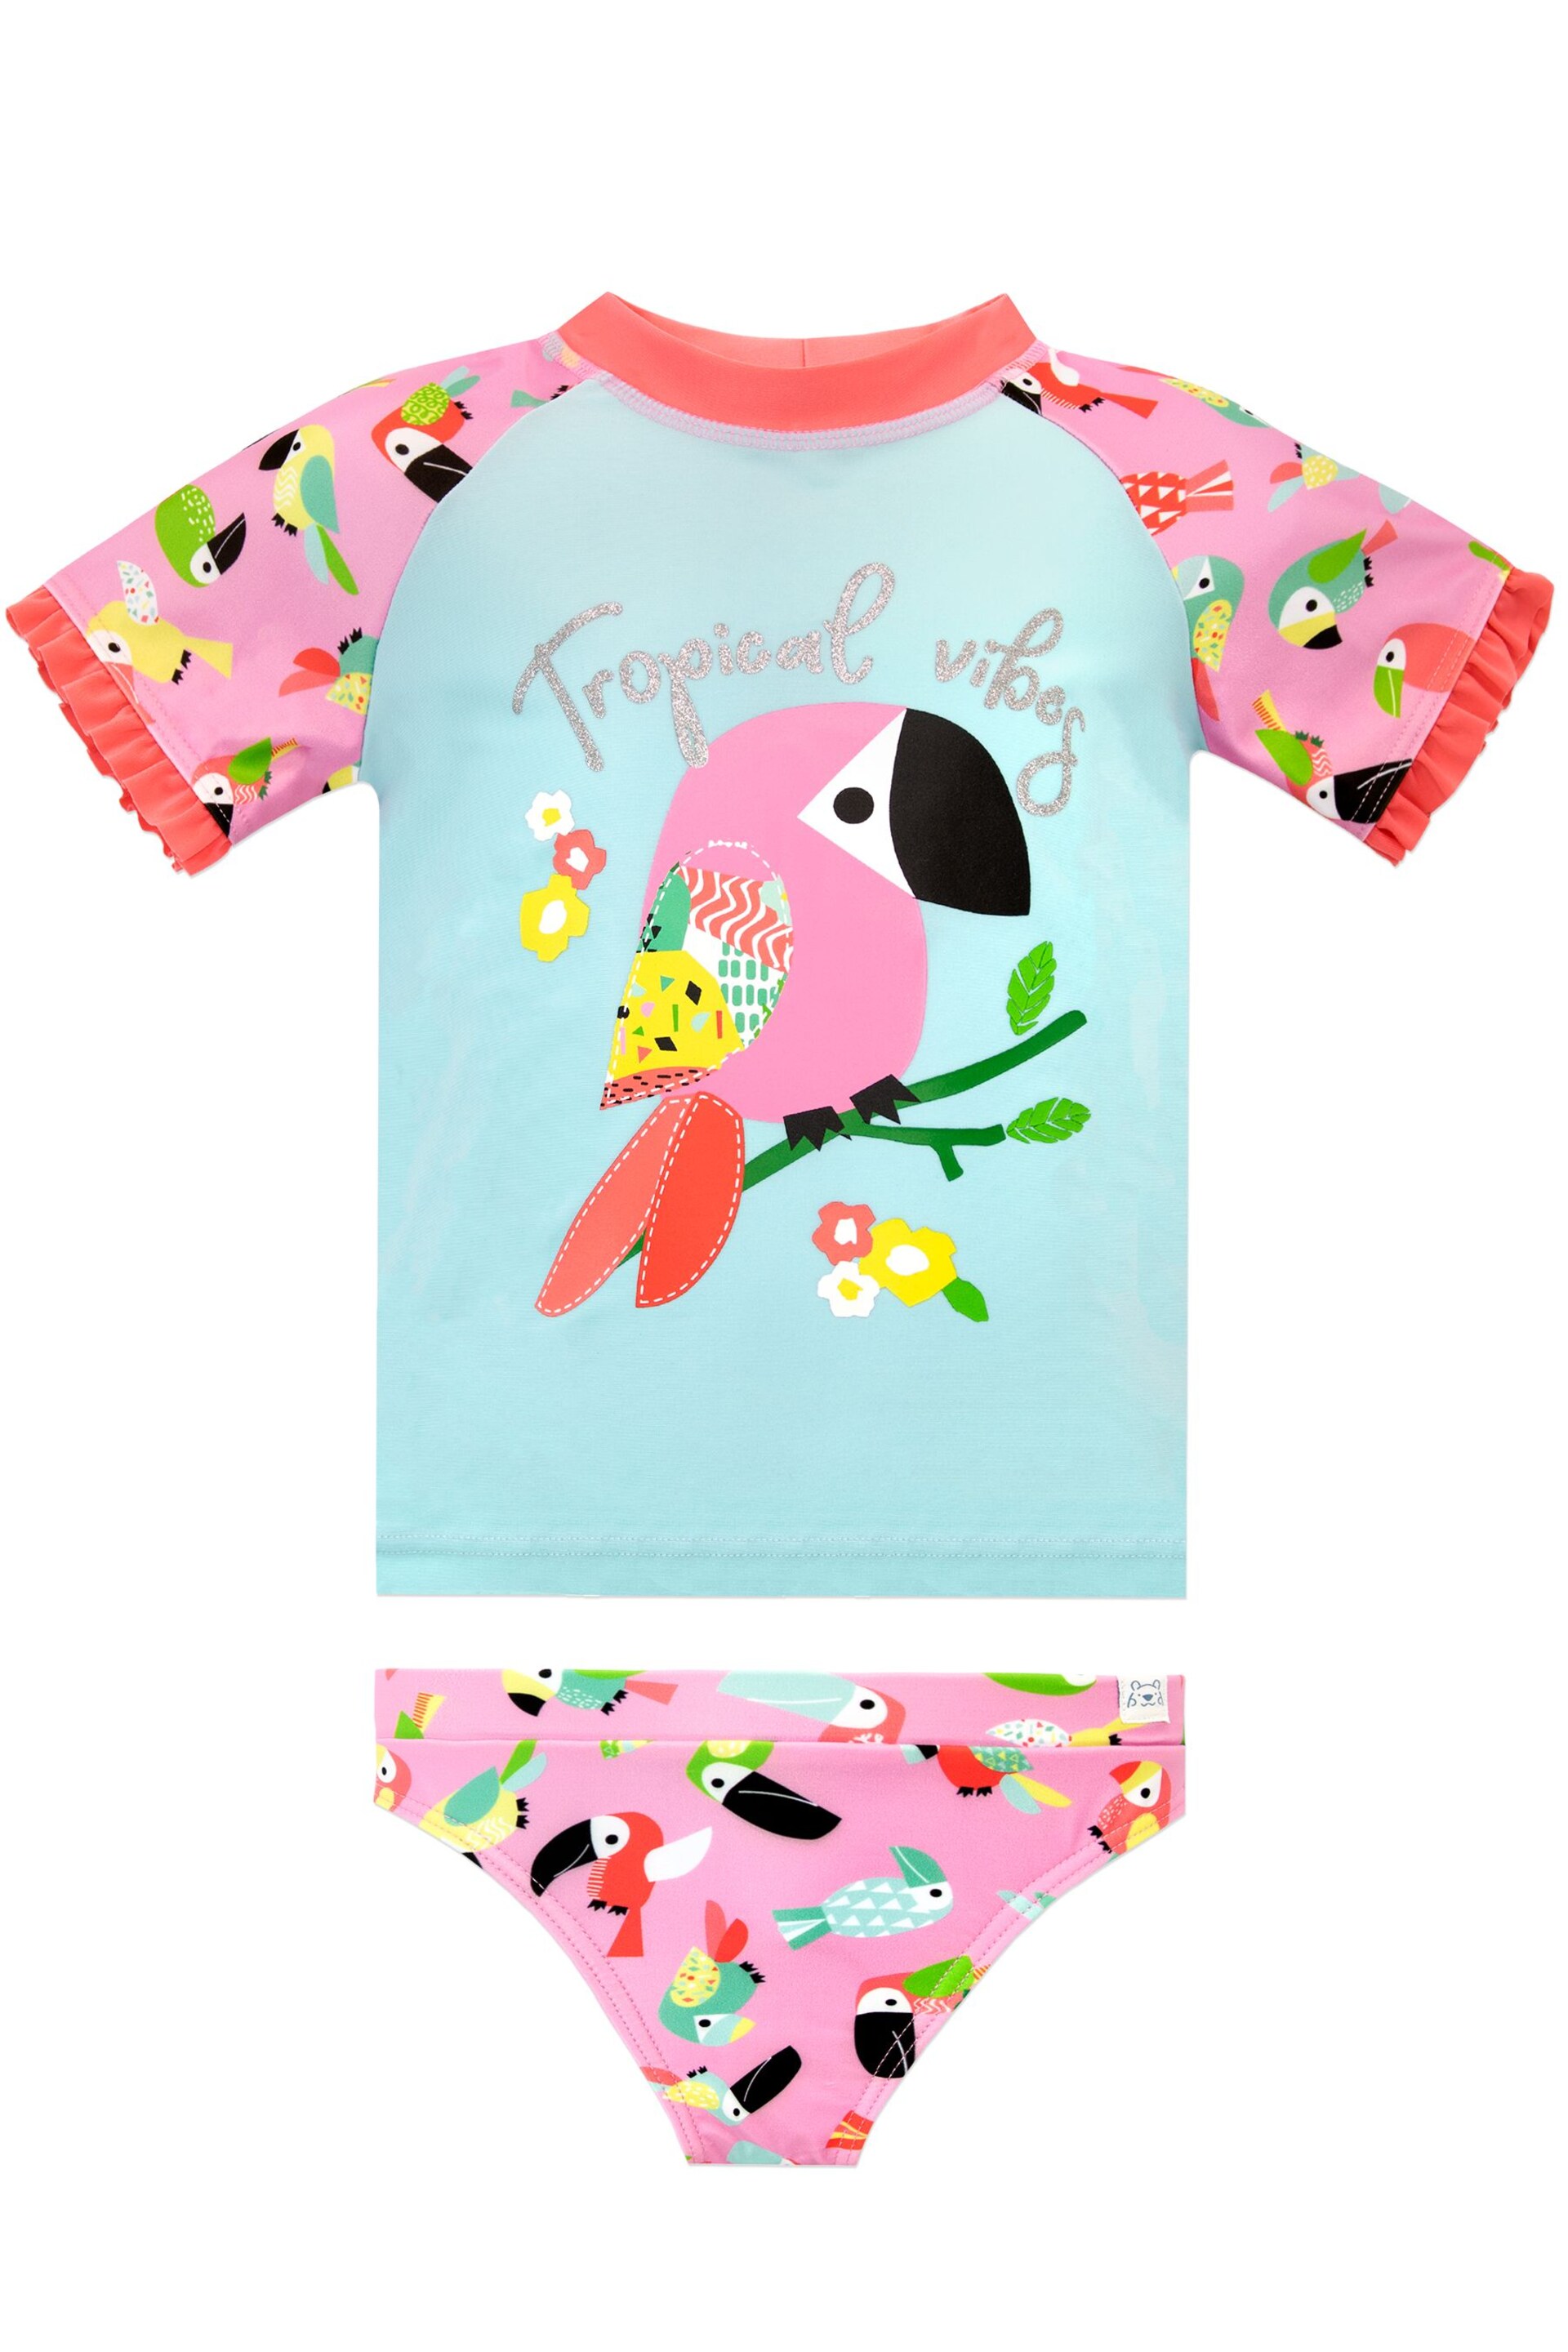 Harry Bear Grey Harry Bear Pink Tropical Vibes Swimsuits - Image 1 of 5